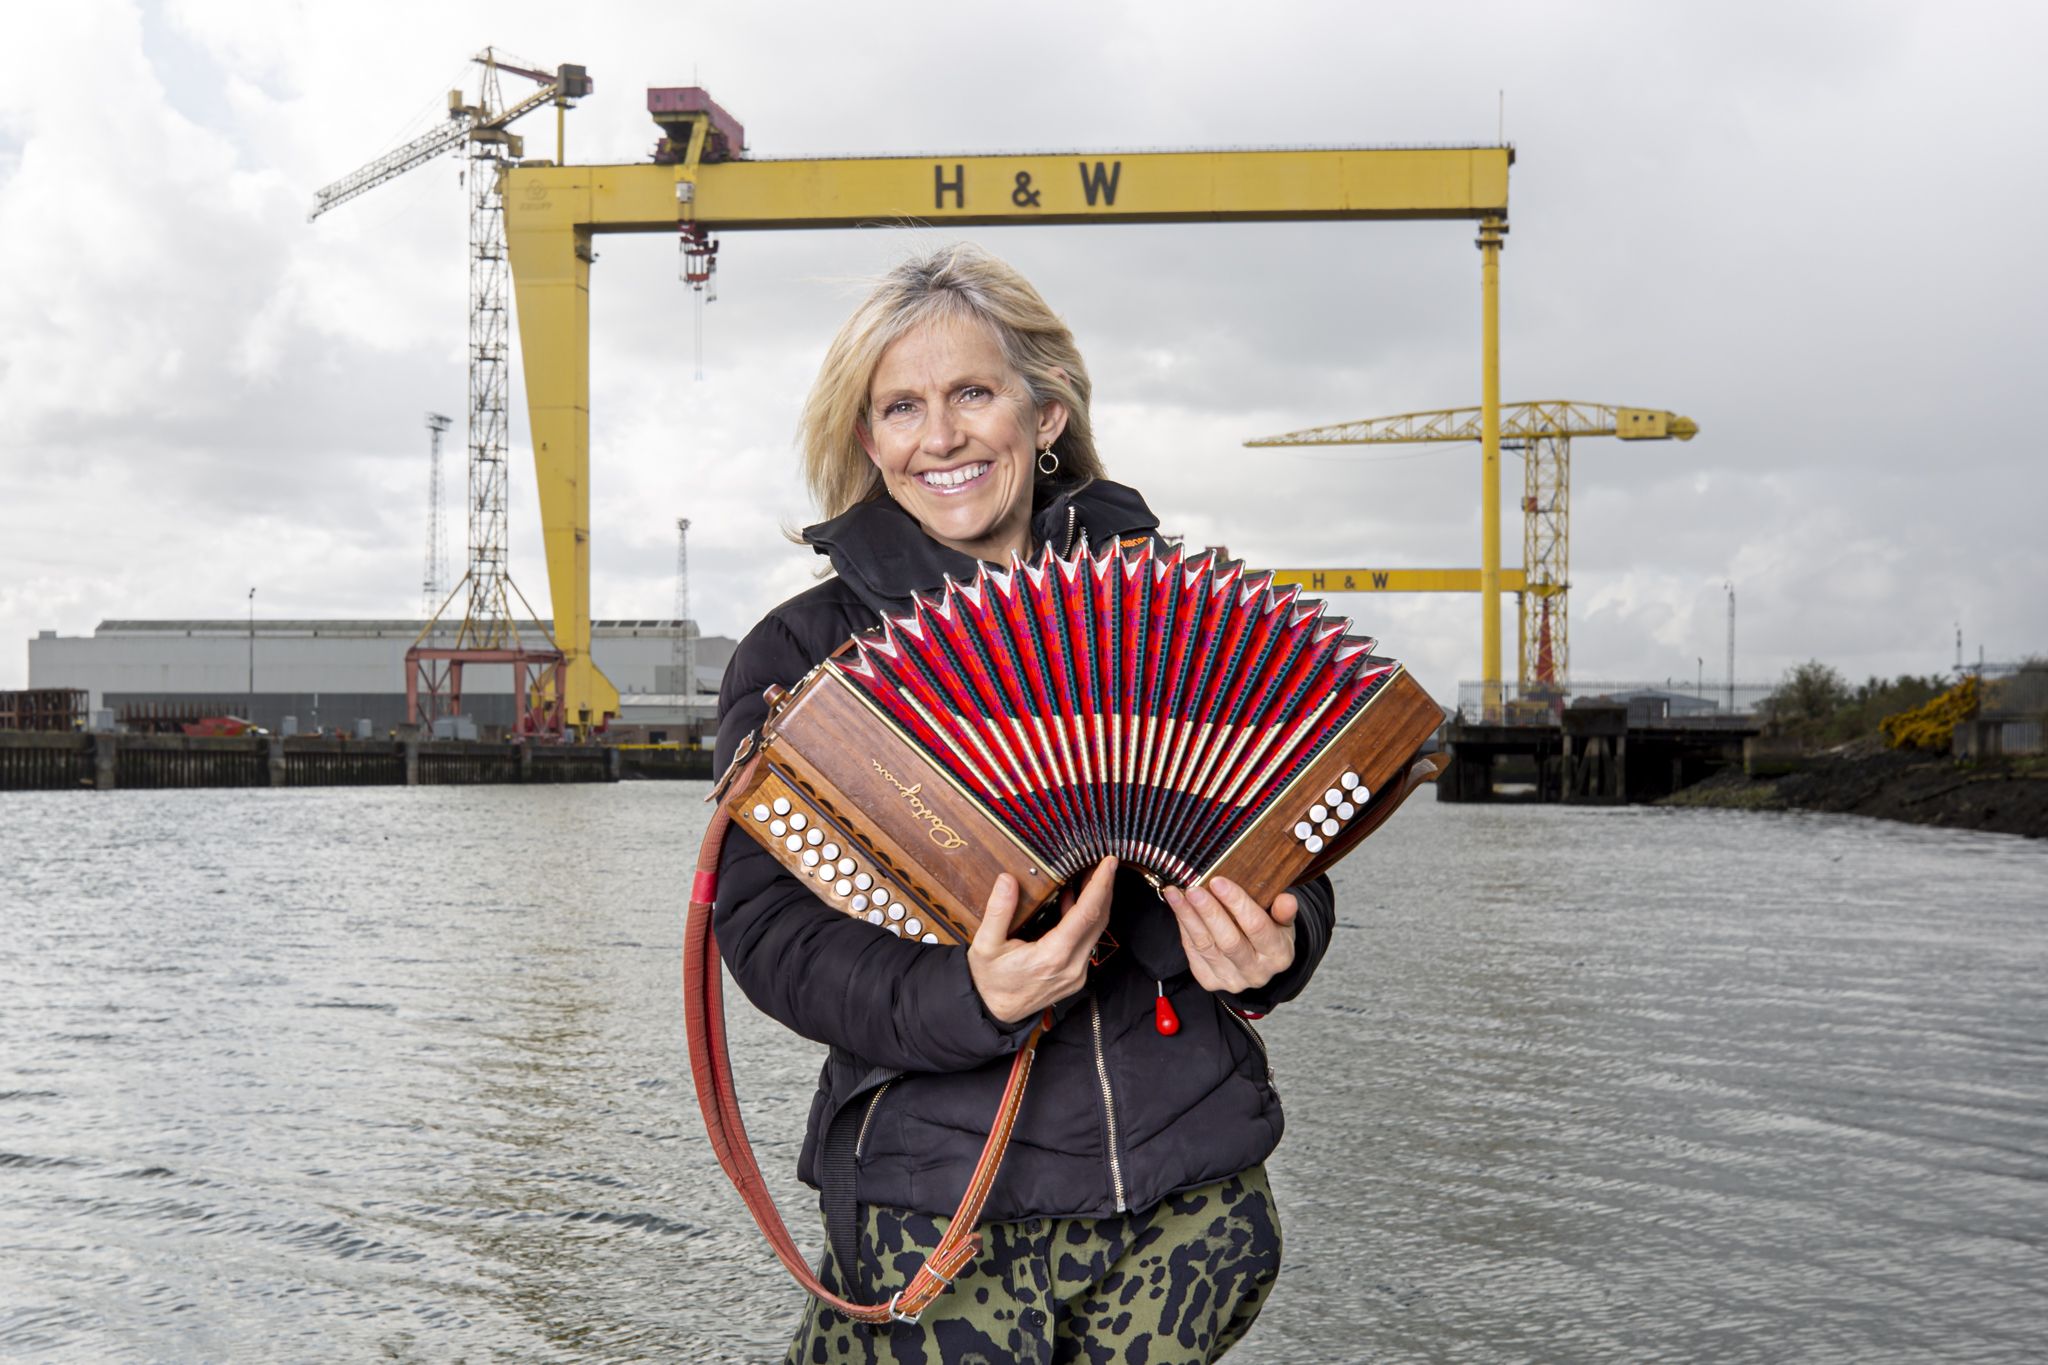 TRADFEST: Sharon Shannon is set to play the last night of the festival on 29 July